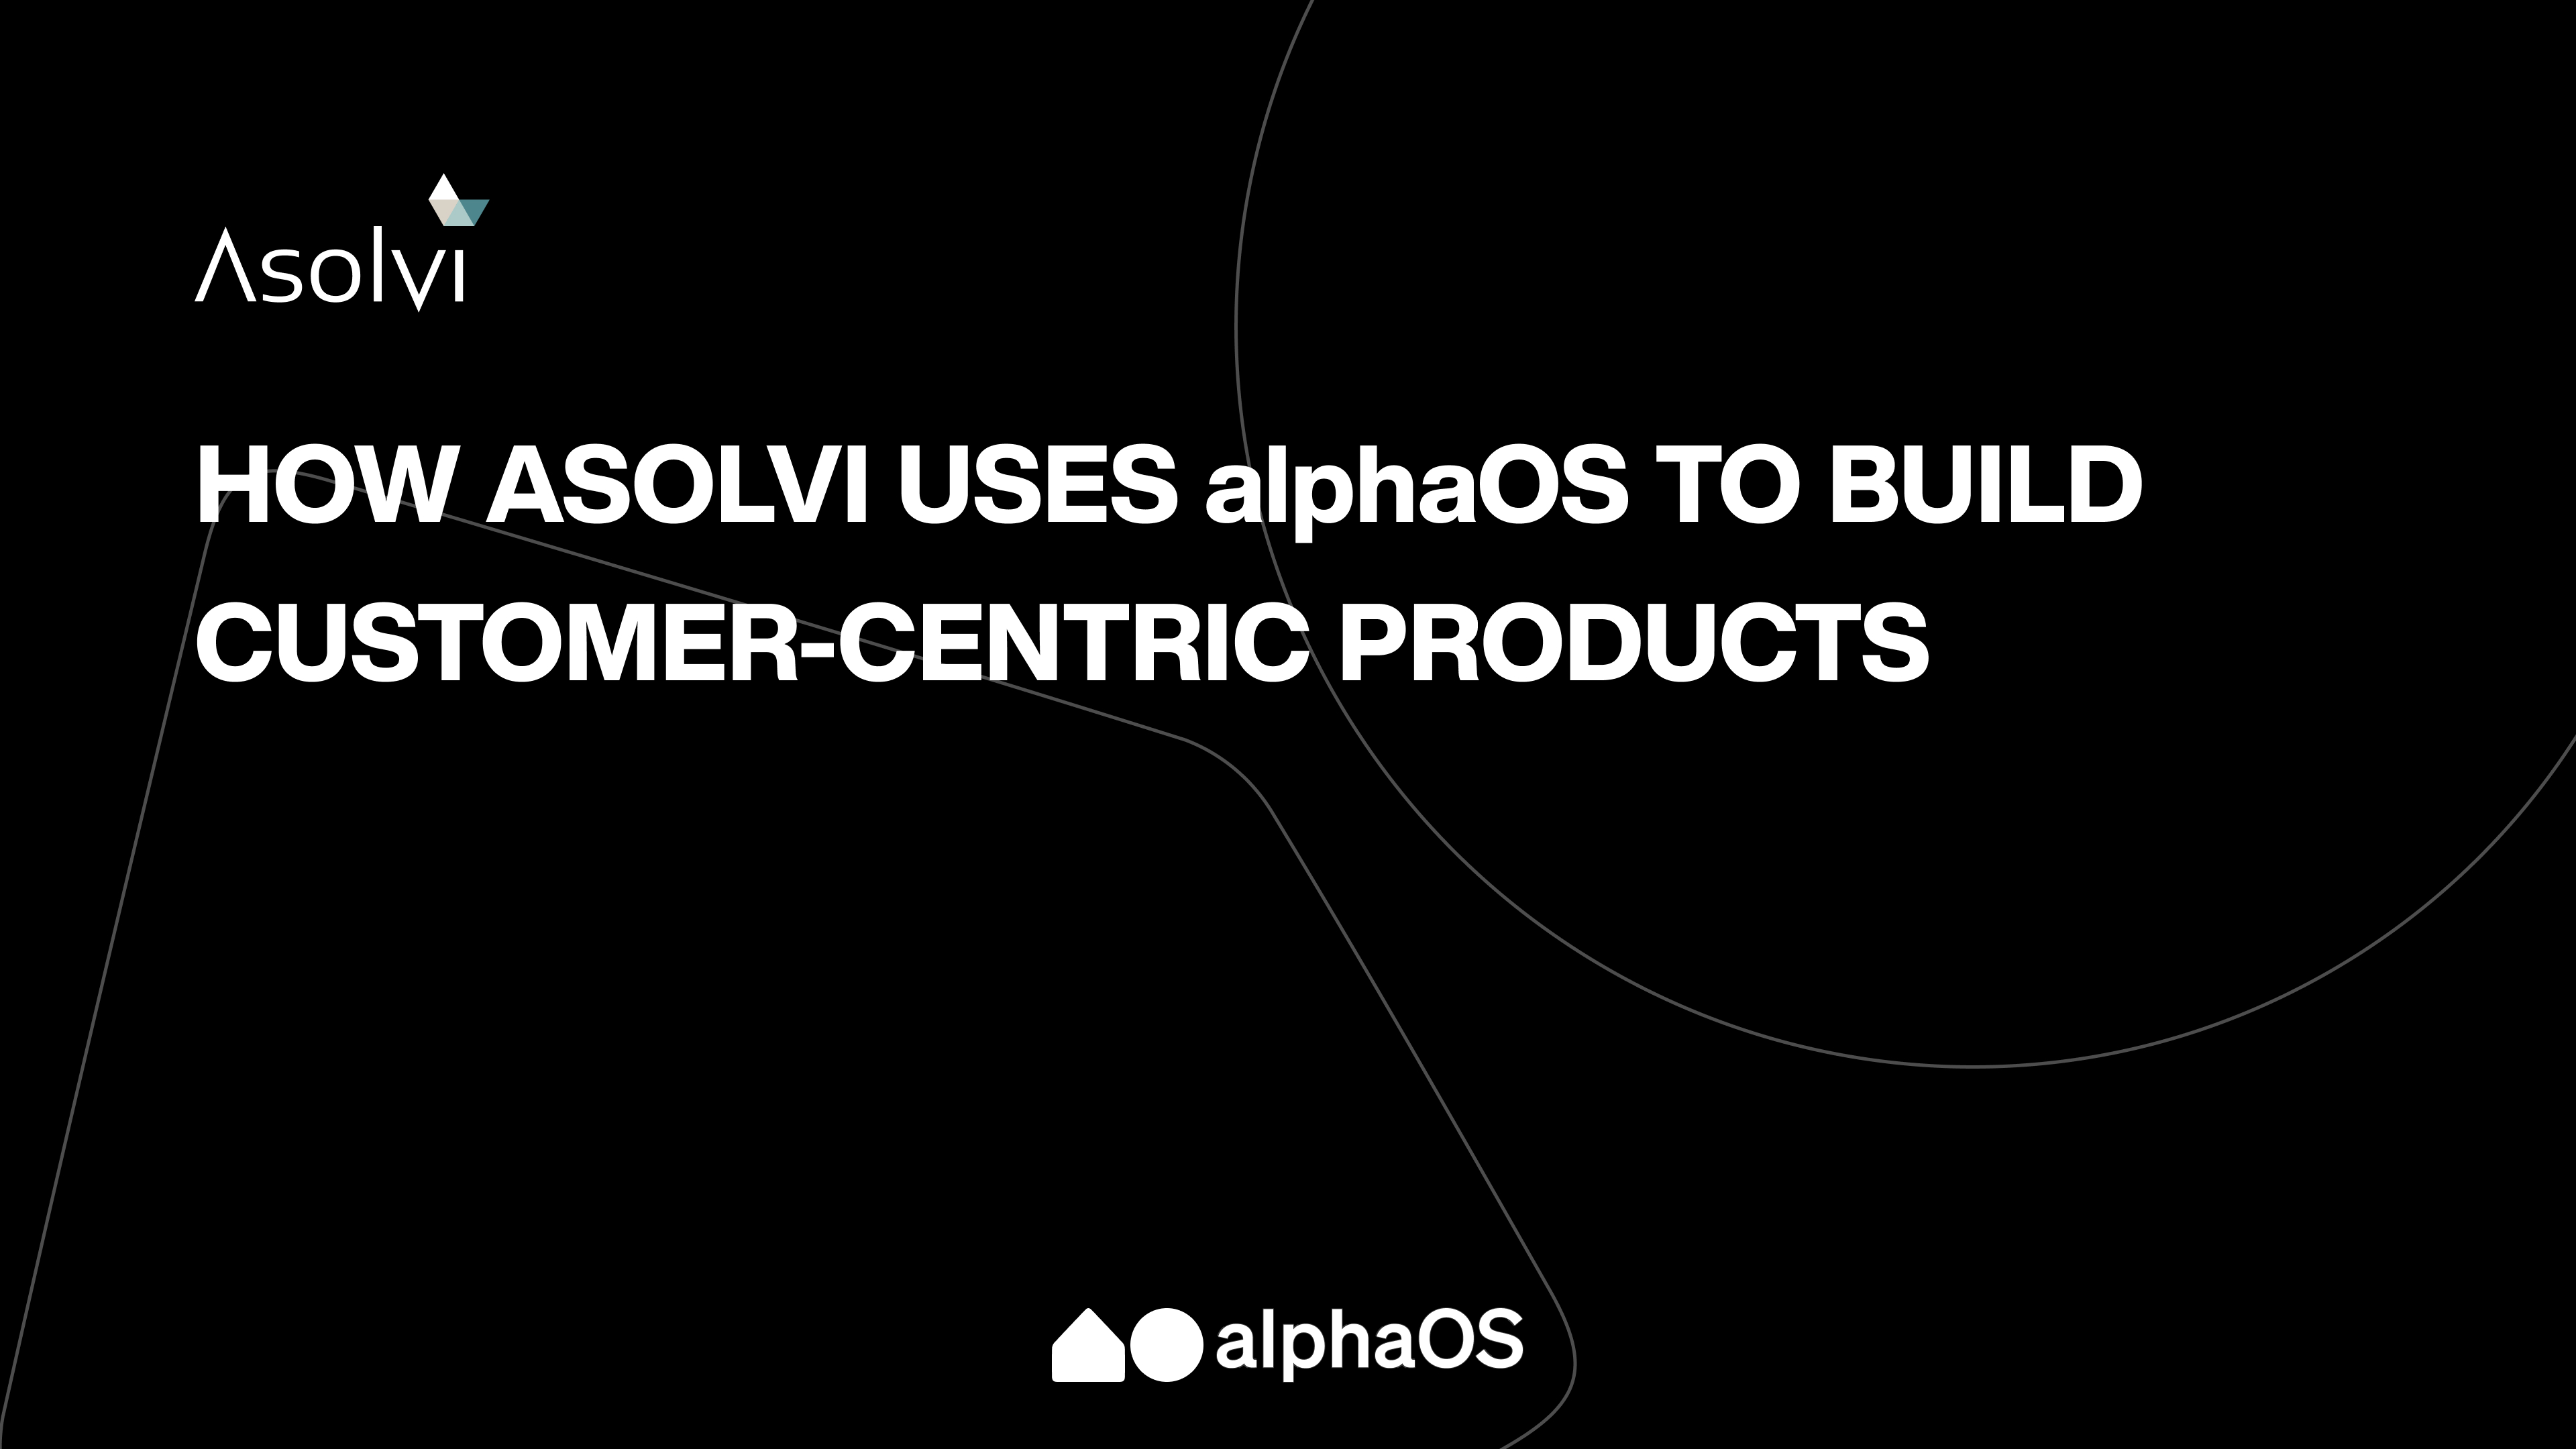 How Asolvi uses alphaOS to build customer-centric products